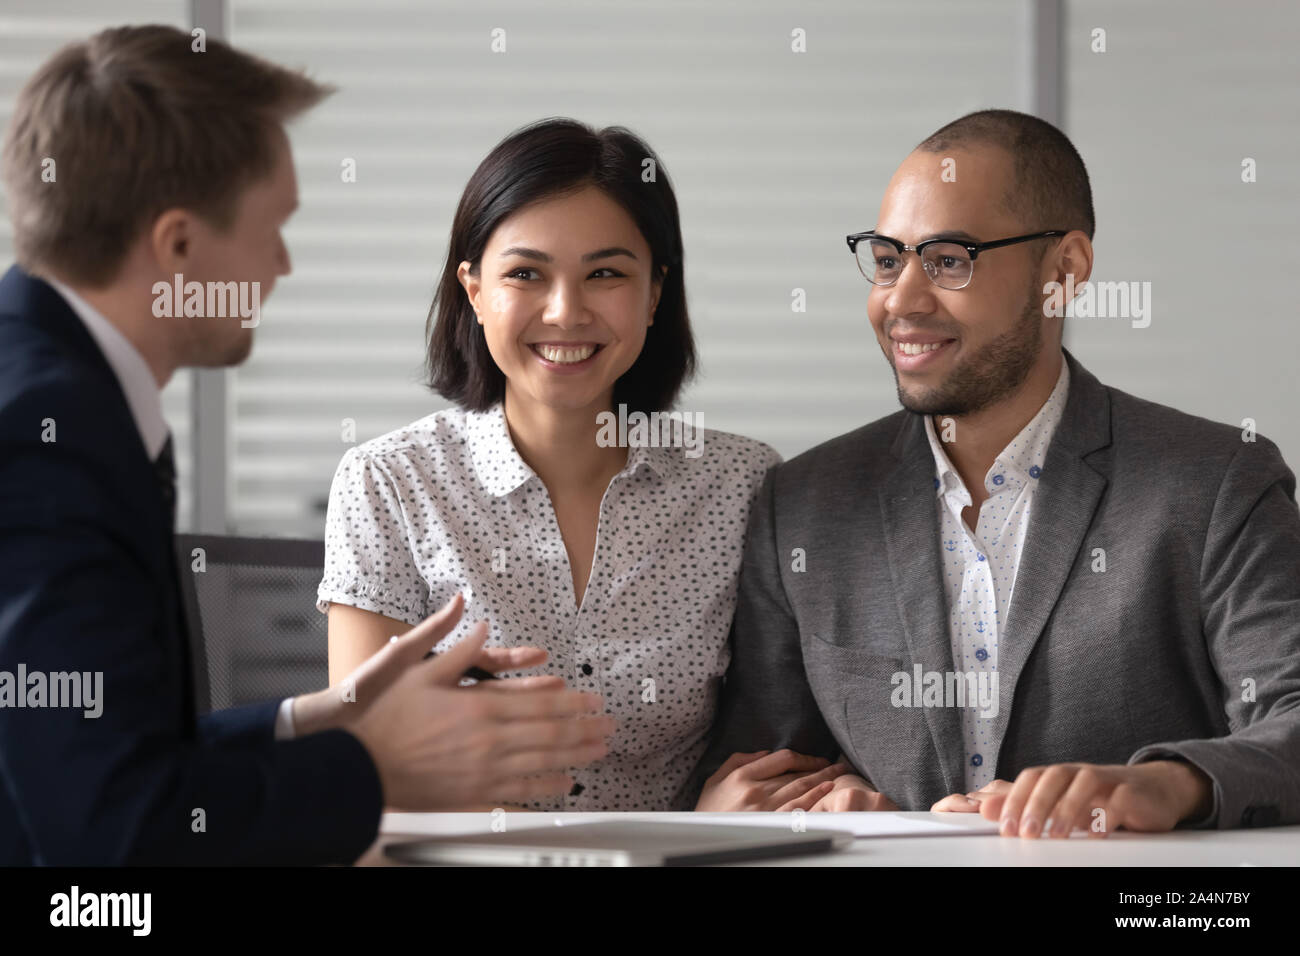 Manager realtor banker consulting happy diverse young couple at meeting Stock Photo